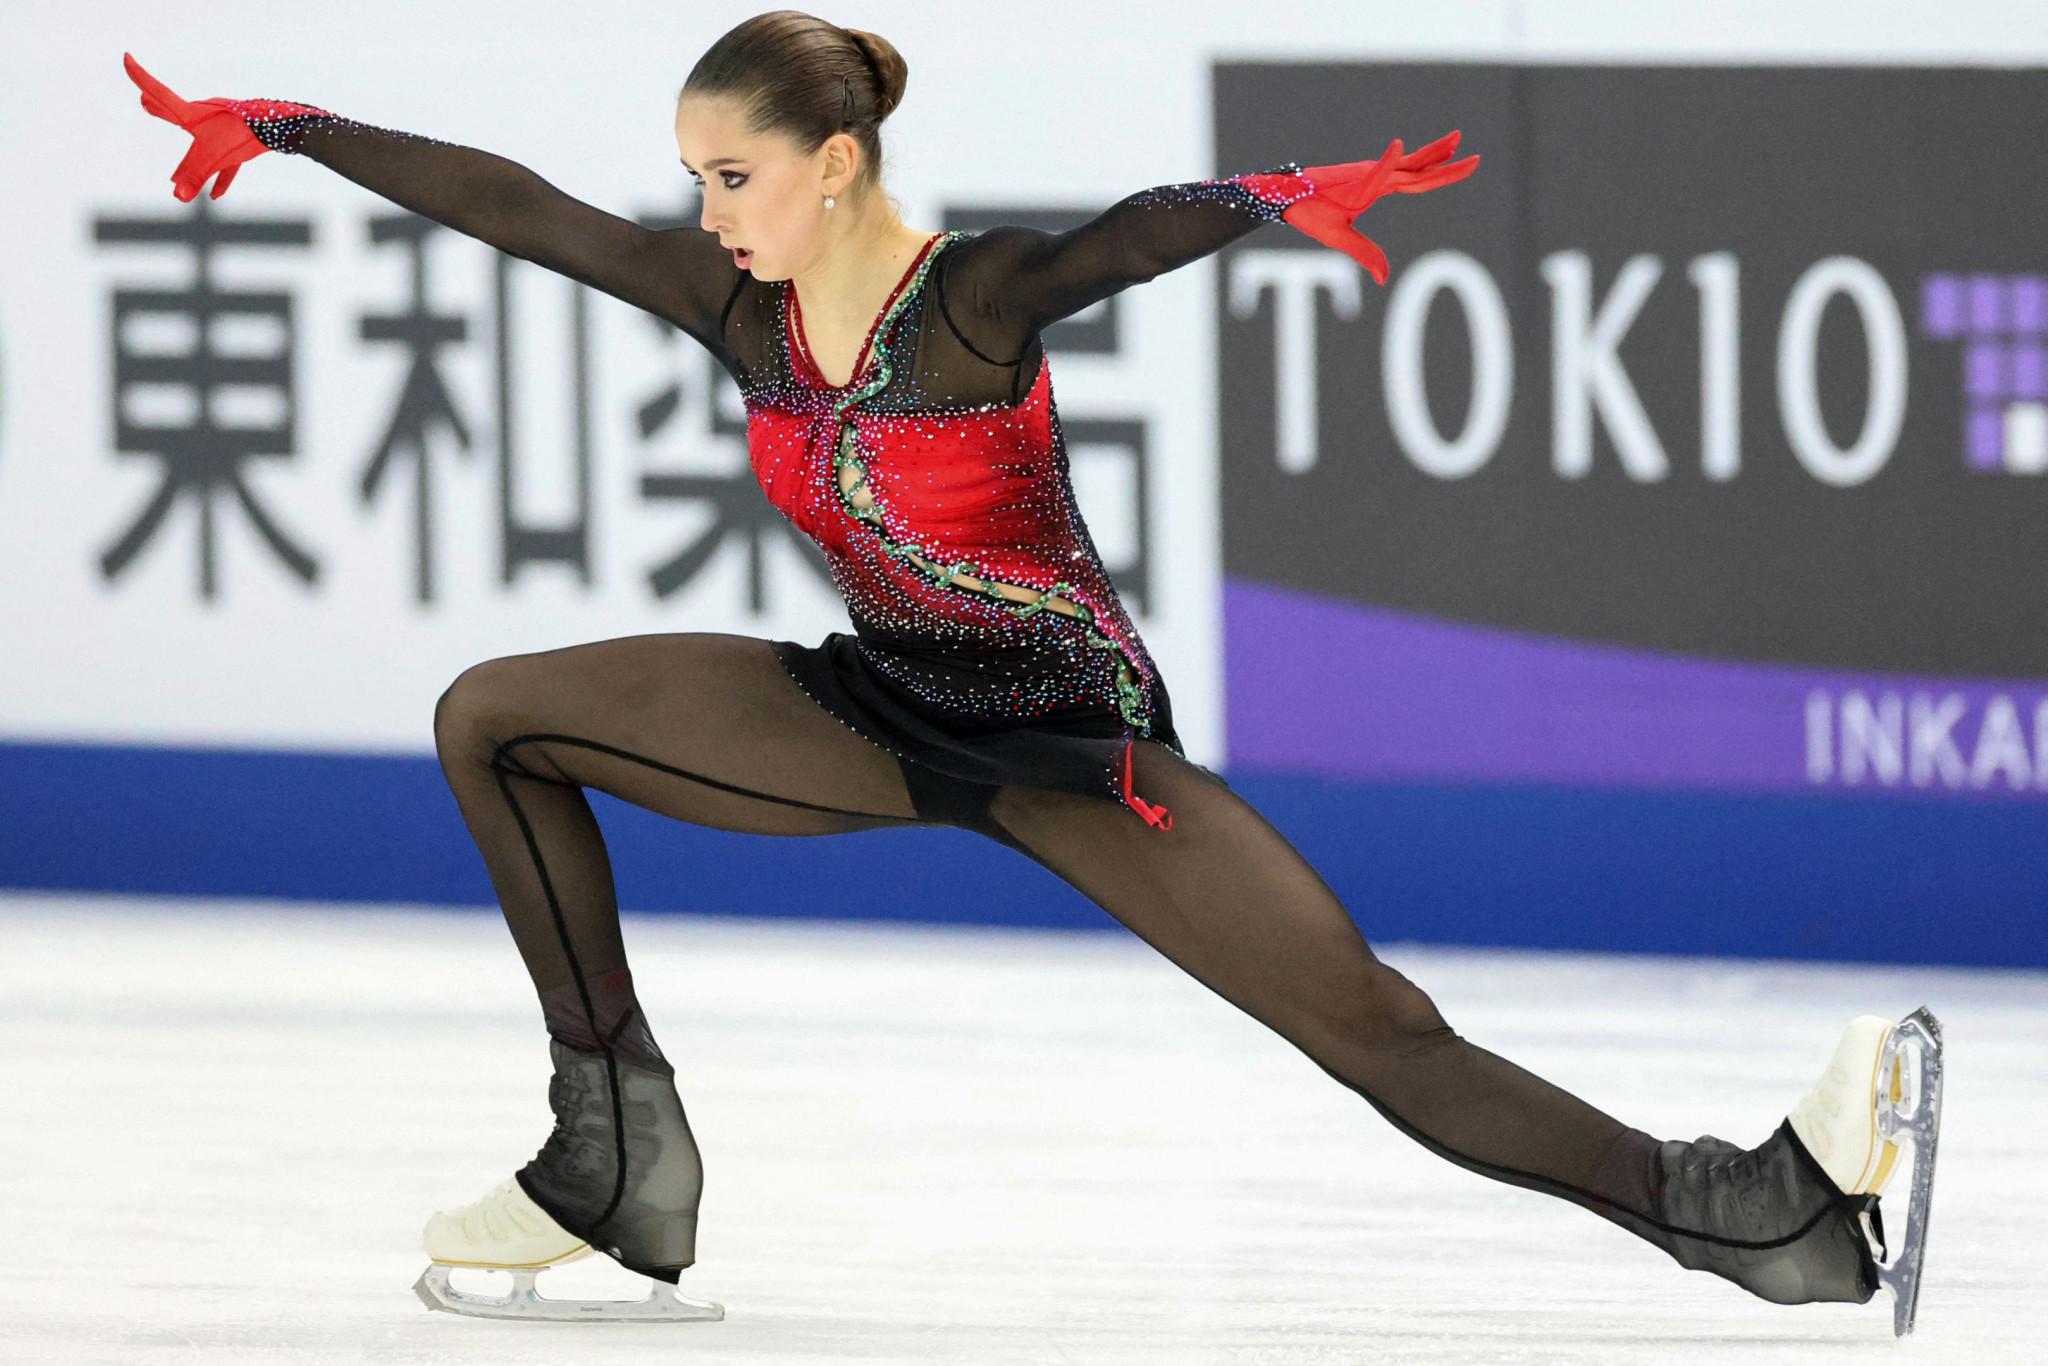 Kamila Valieva of Russia continued her record form for the previous day to win the women's event at the Rostelecom Cup ©Getty Images 